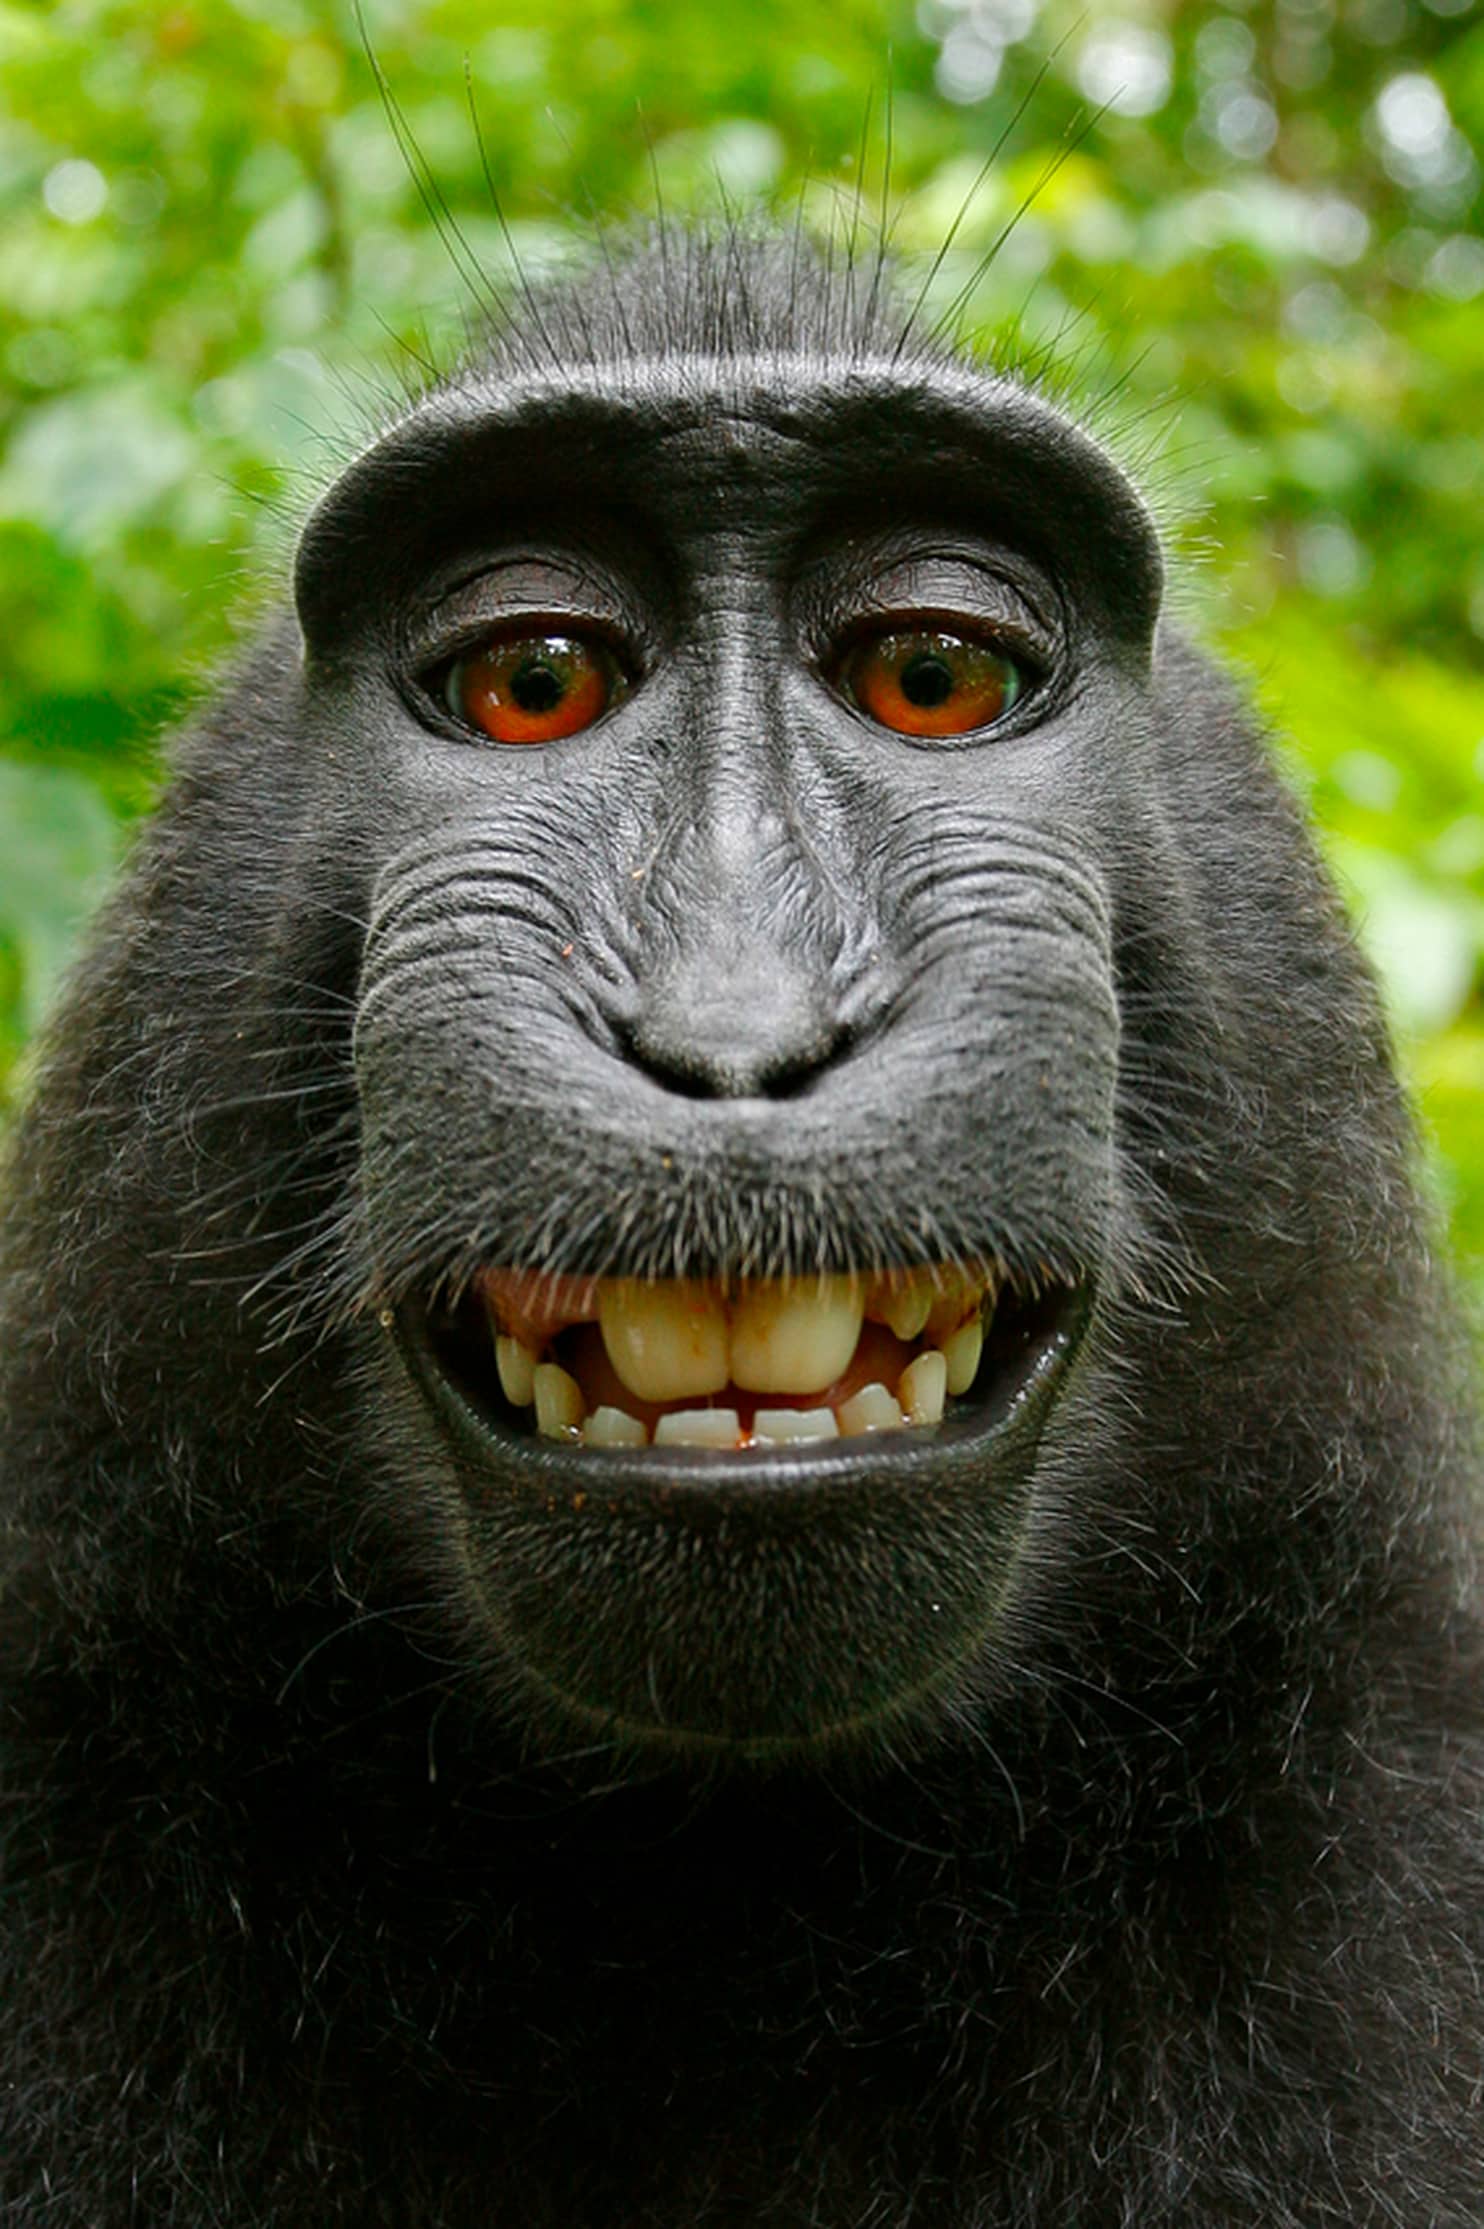 No monkey business here: The monkey selfie copyright case is over ...